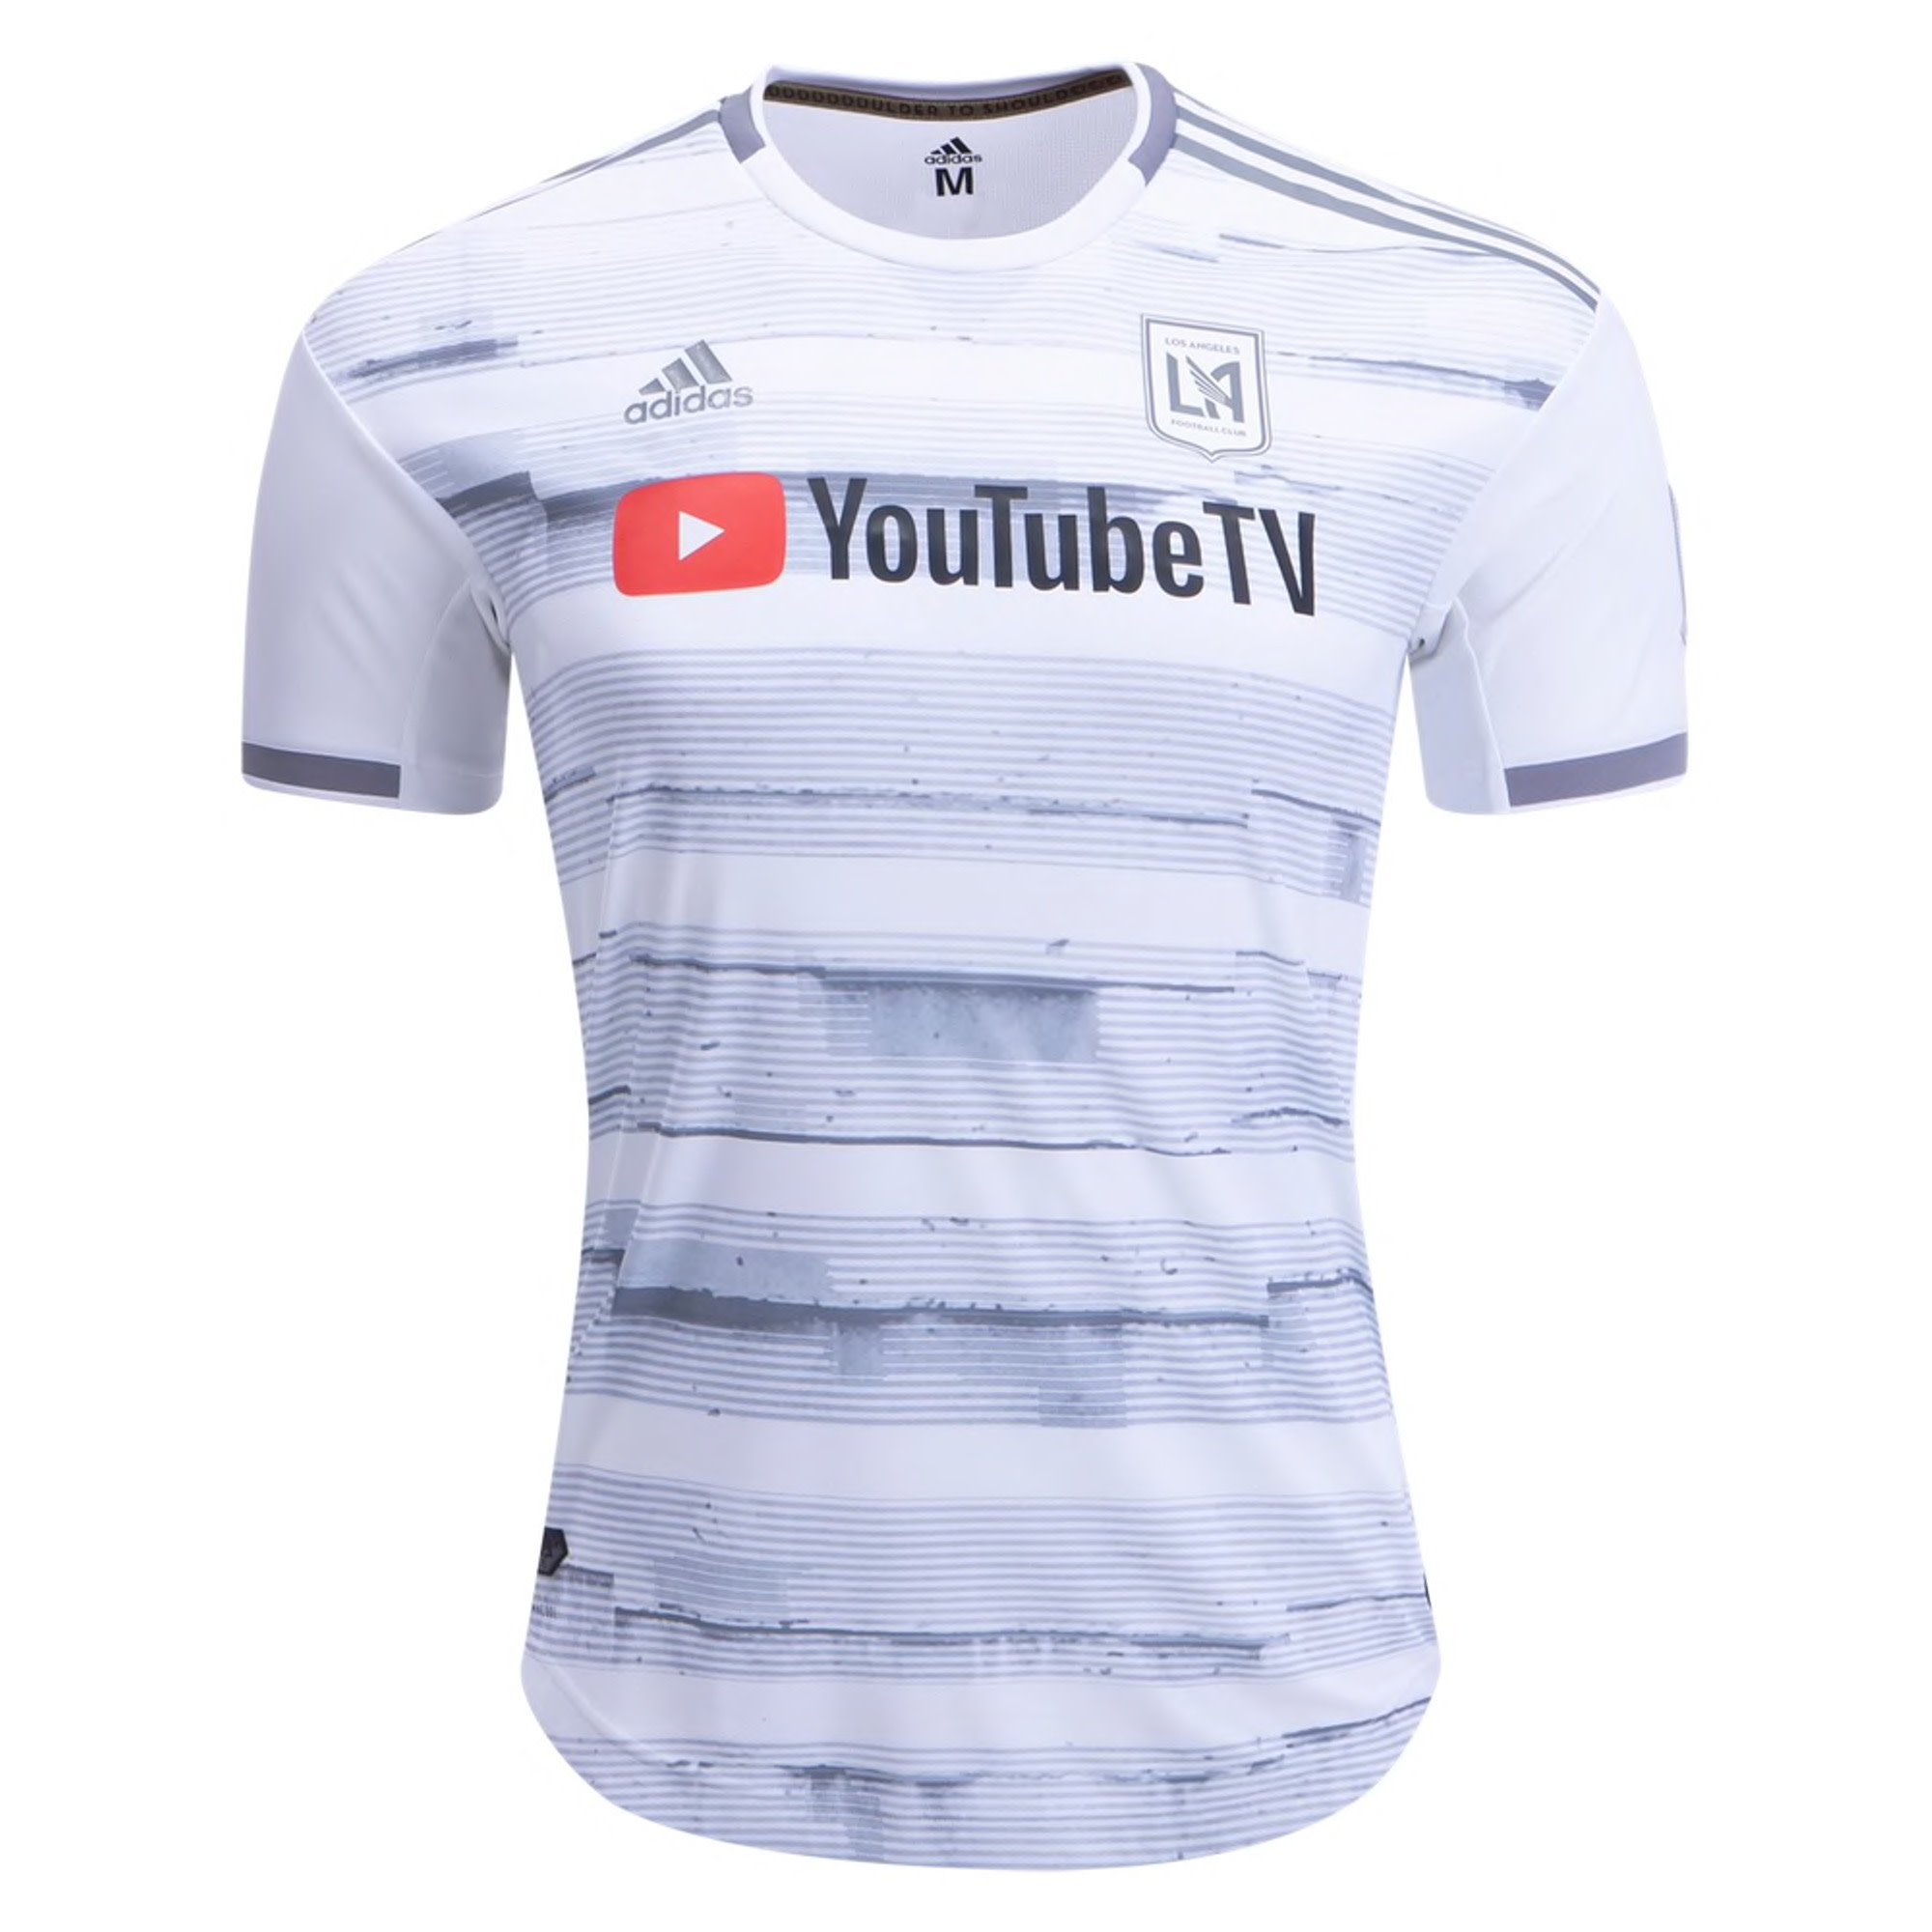 LAFC M Adidas '20 Authentic Away Jersey White - The Locker Room of Downey